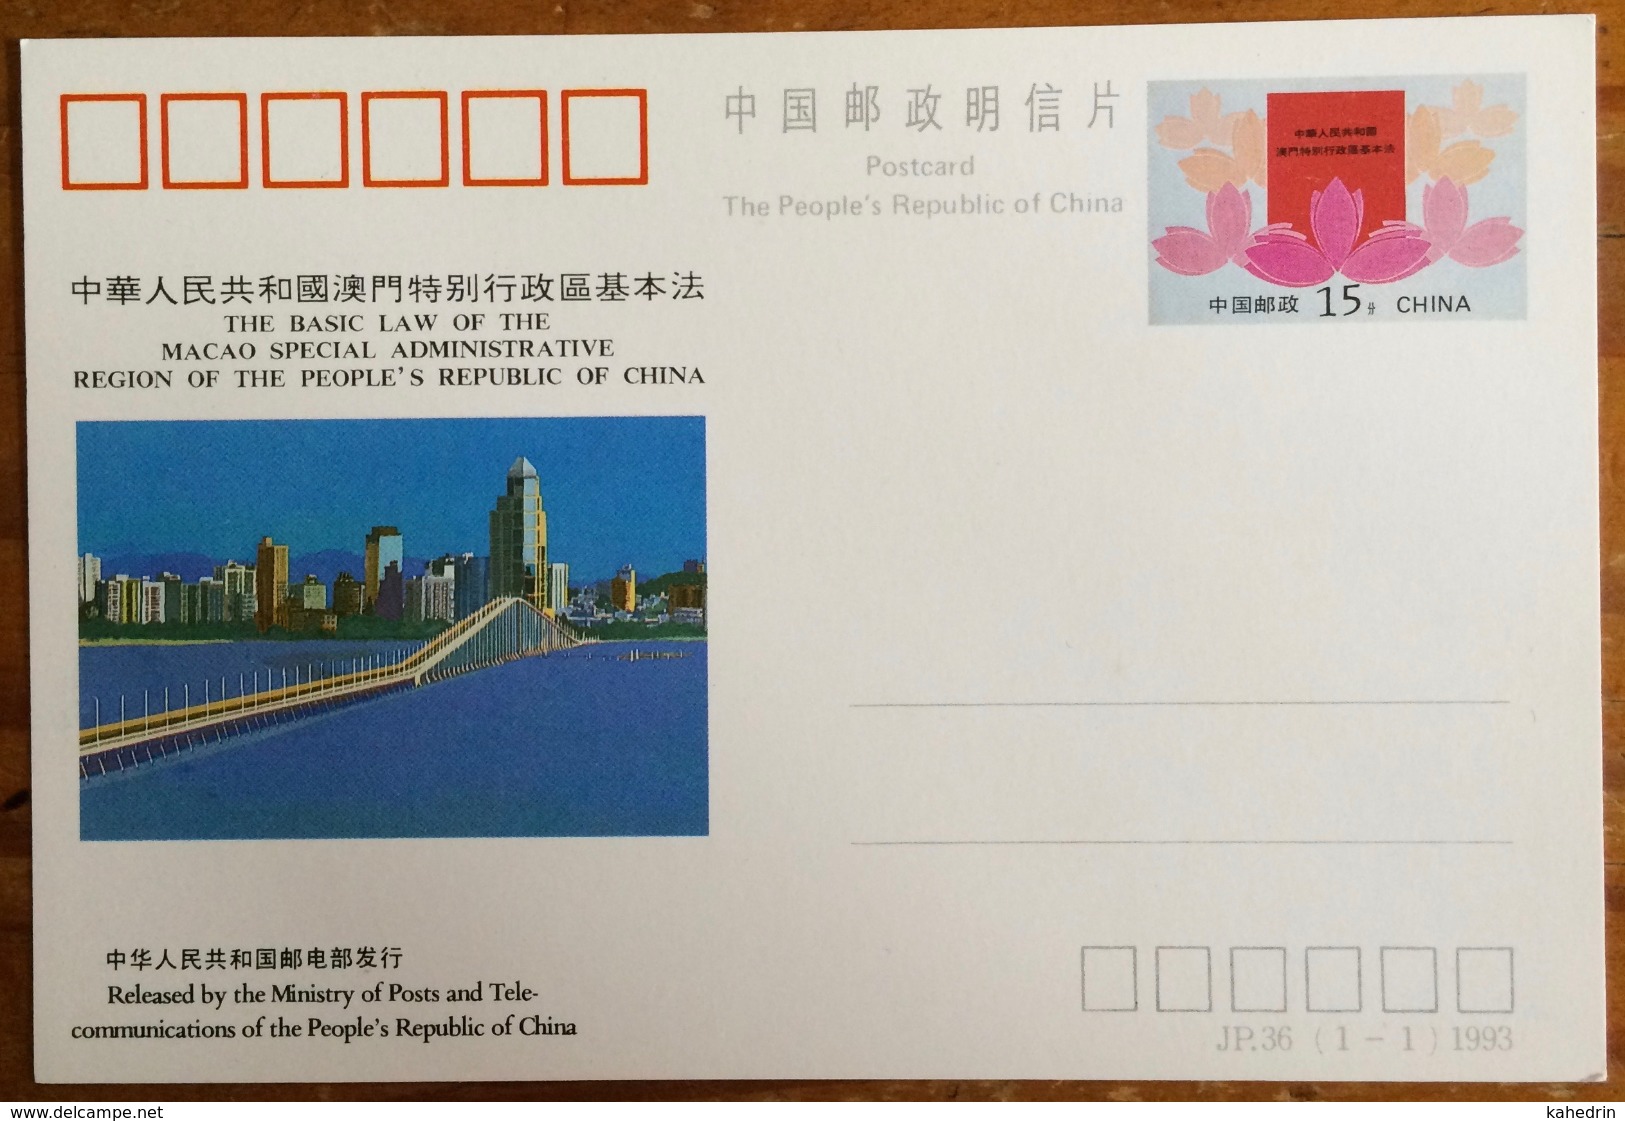 China 1993, JP. 36, The Basic Law Of The Macao Special Administrative Region Of The P.R. China - China